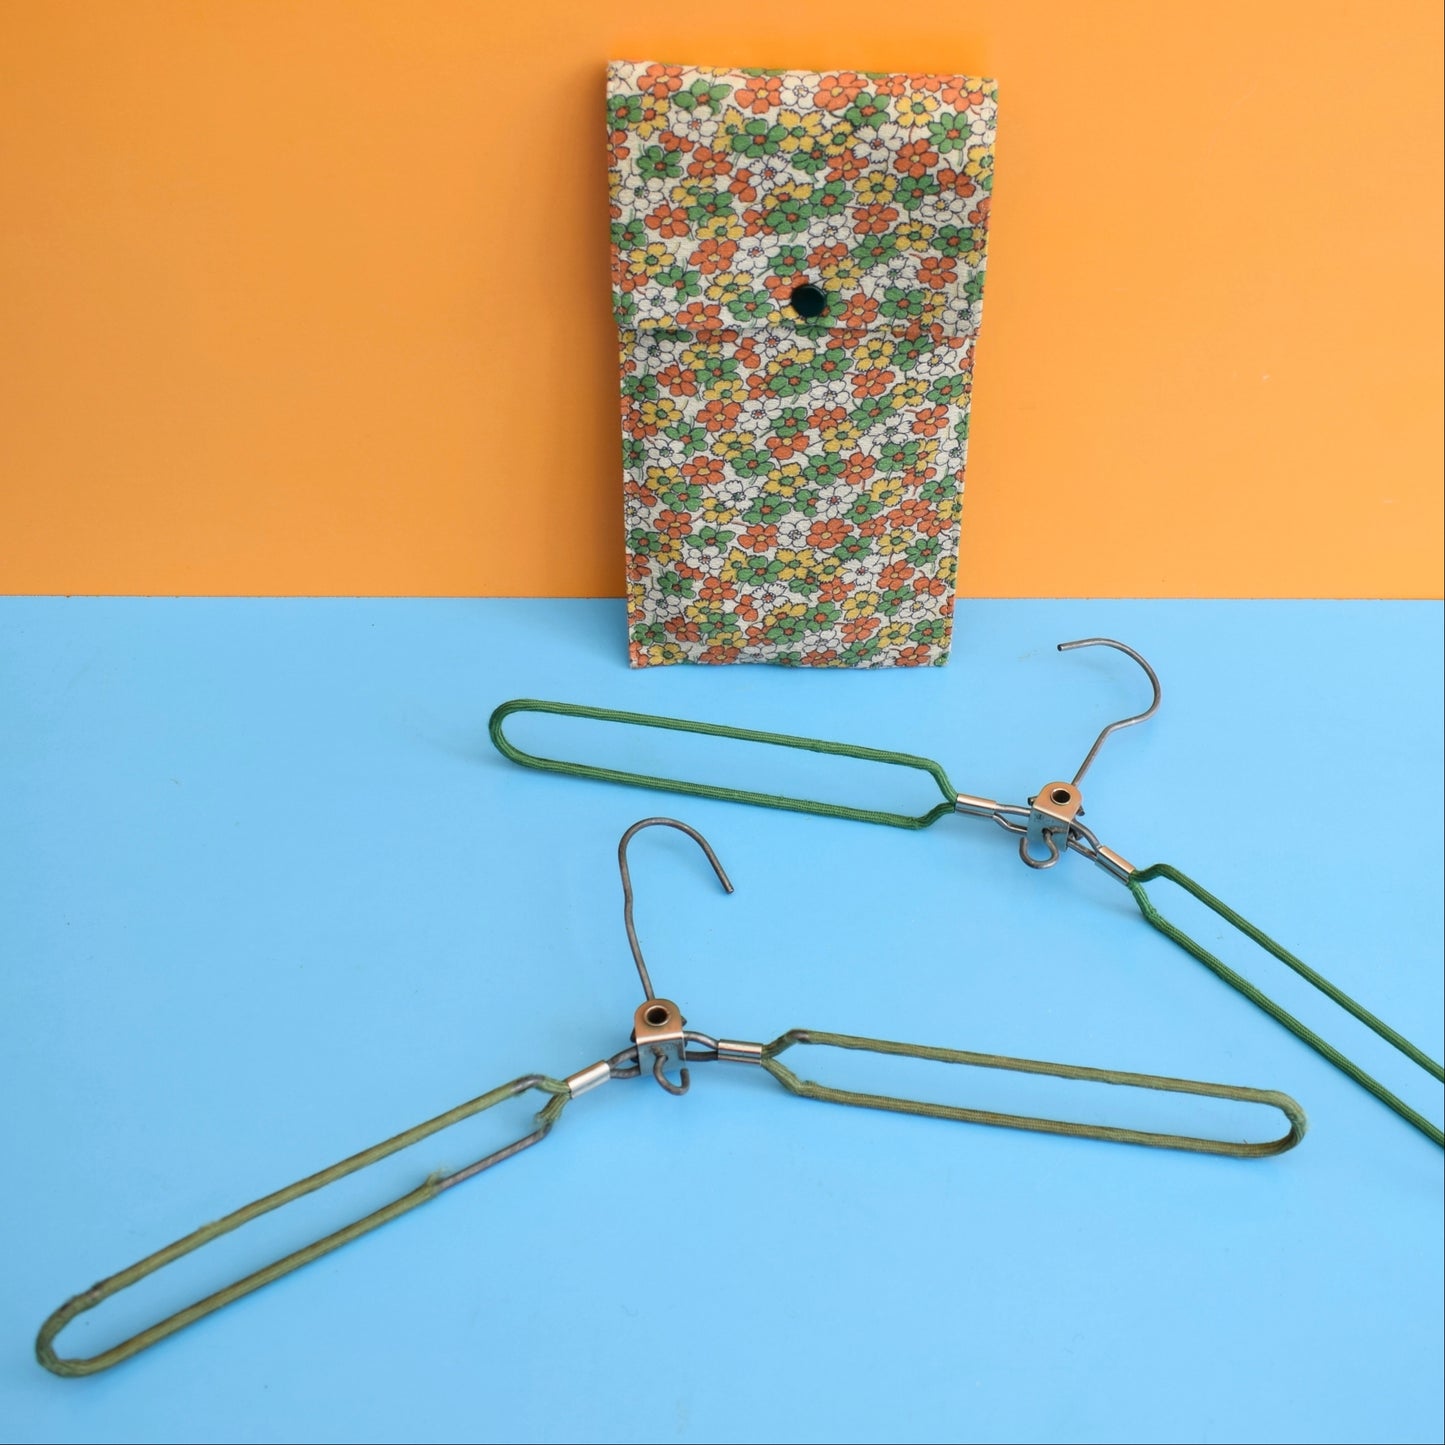 Vintage 1950s Folding Hangers in Pouch - Floral